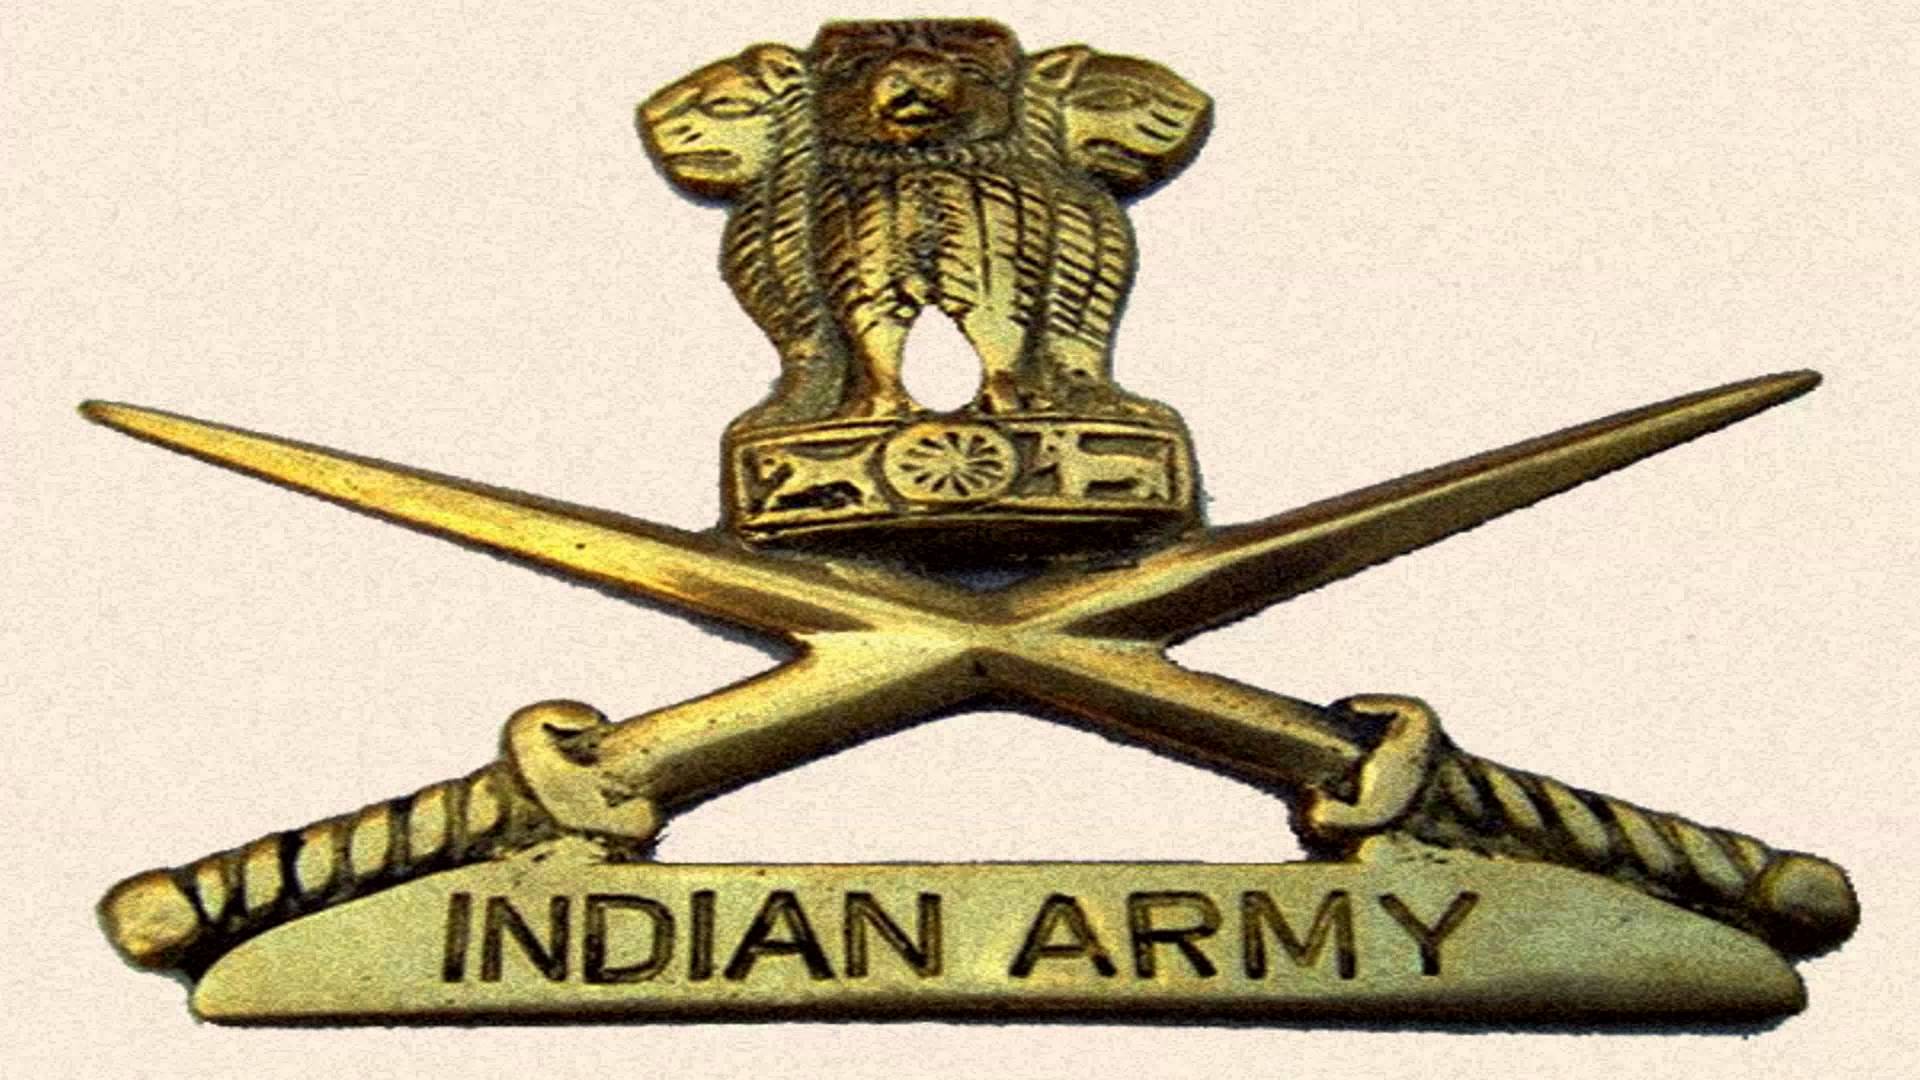 Indian Army to conduct 2019 "Sindhu Sudarshan" exercise 2019 in Rajasthan deserts_40.1